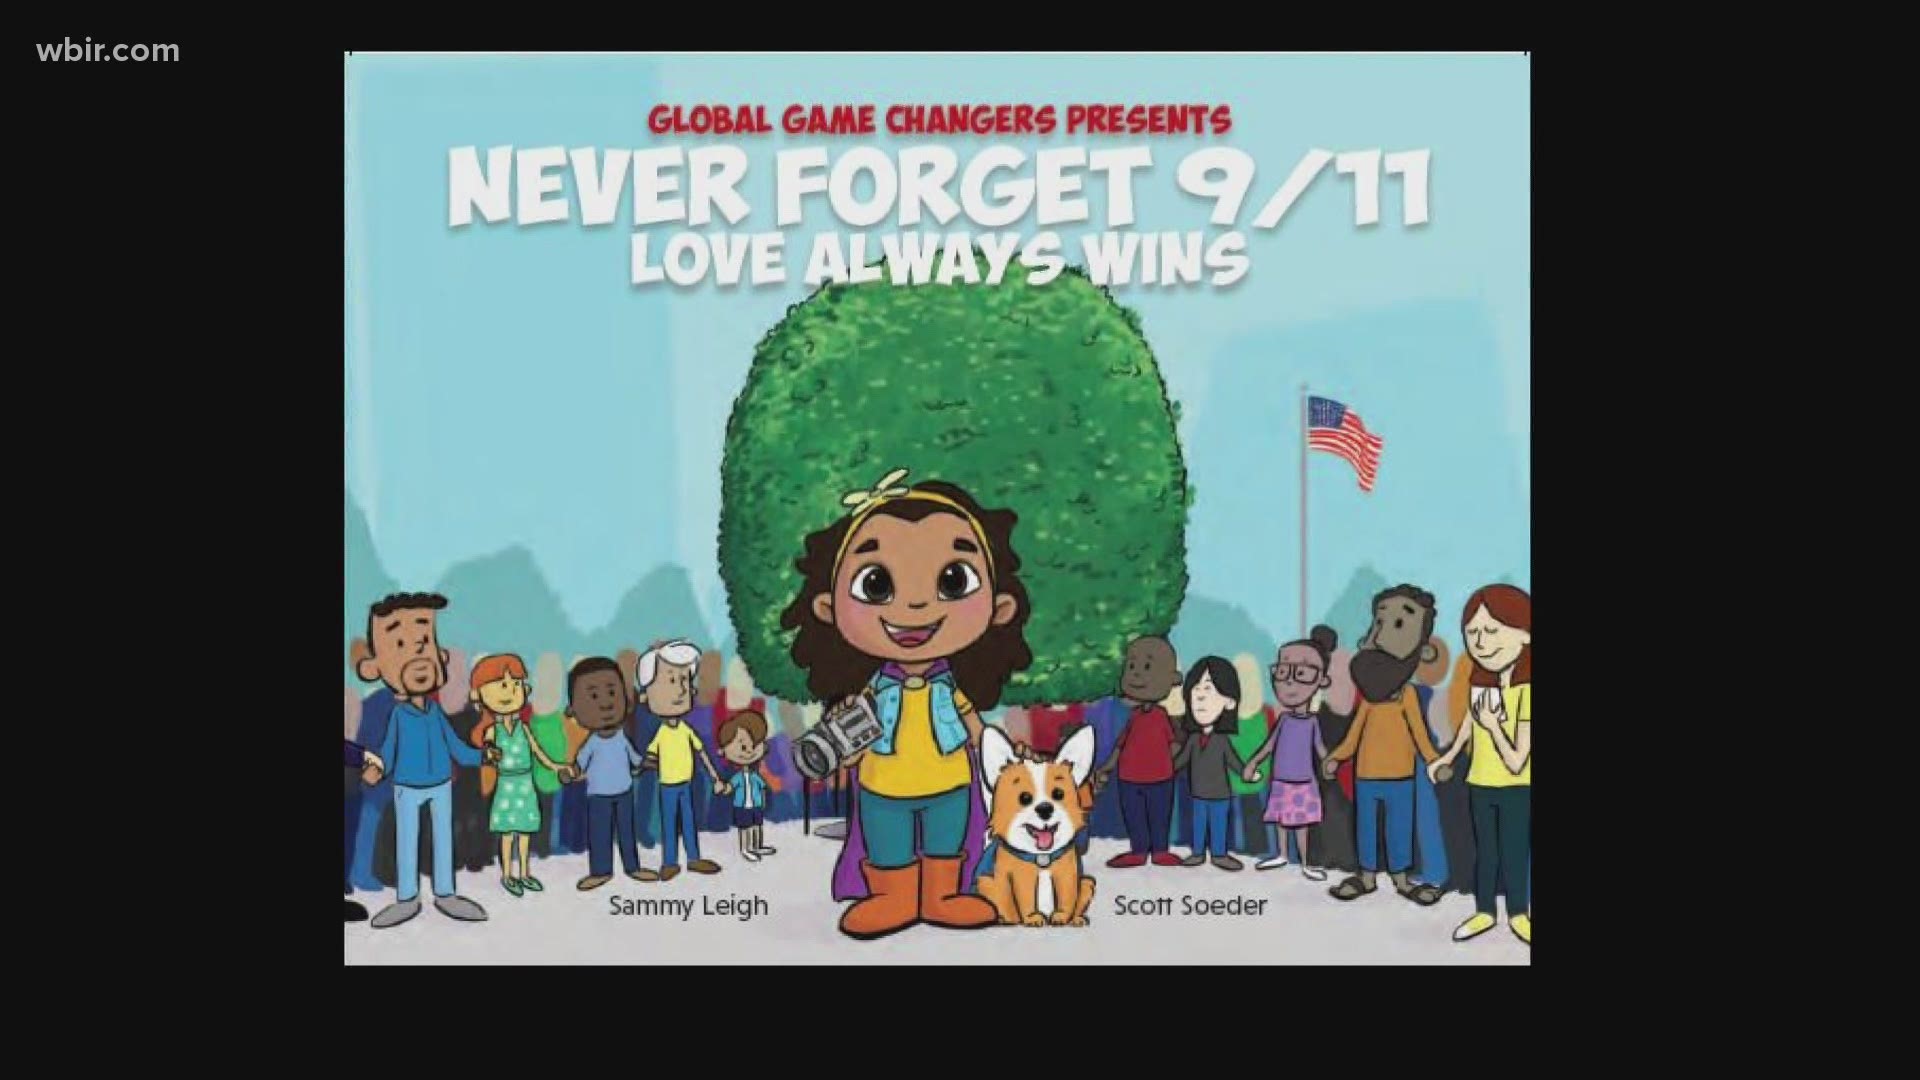 911 Lesson: Celebrating Real Life Superheroes features age-appropriate material for elementary school students